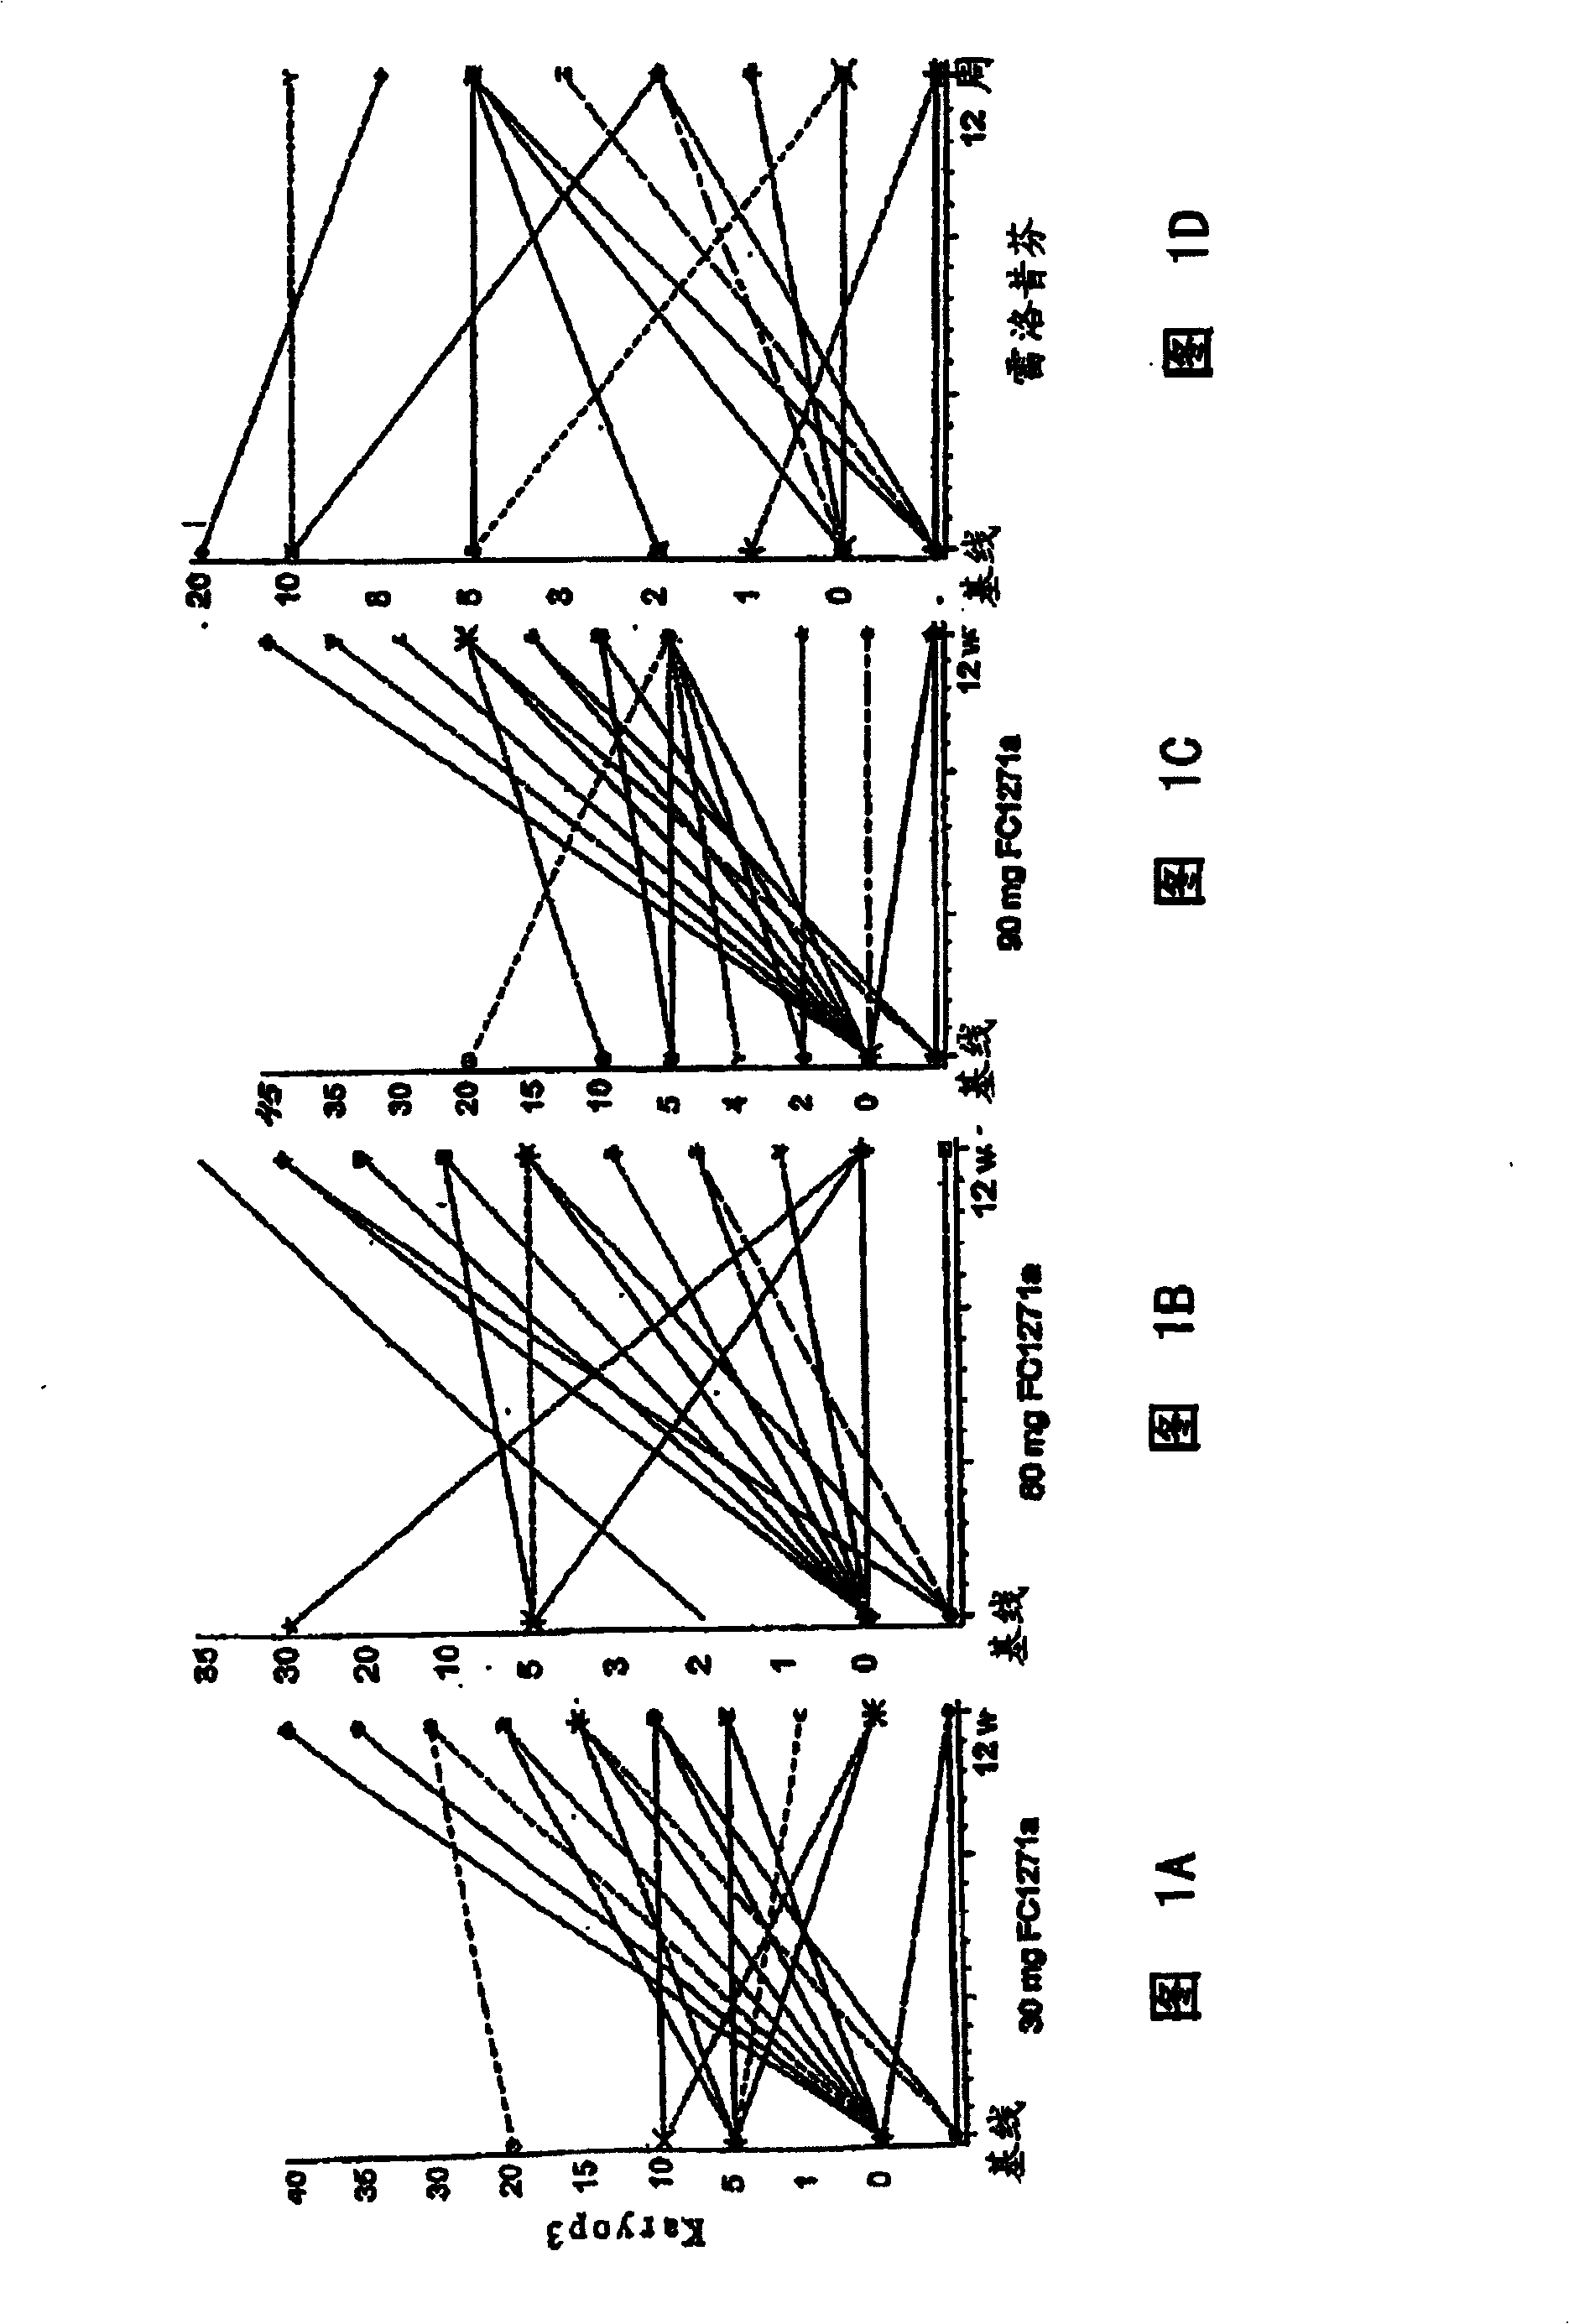 Method for the inhibition of atrophy or for treatment or prevention of atrophy-related symptoms in women